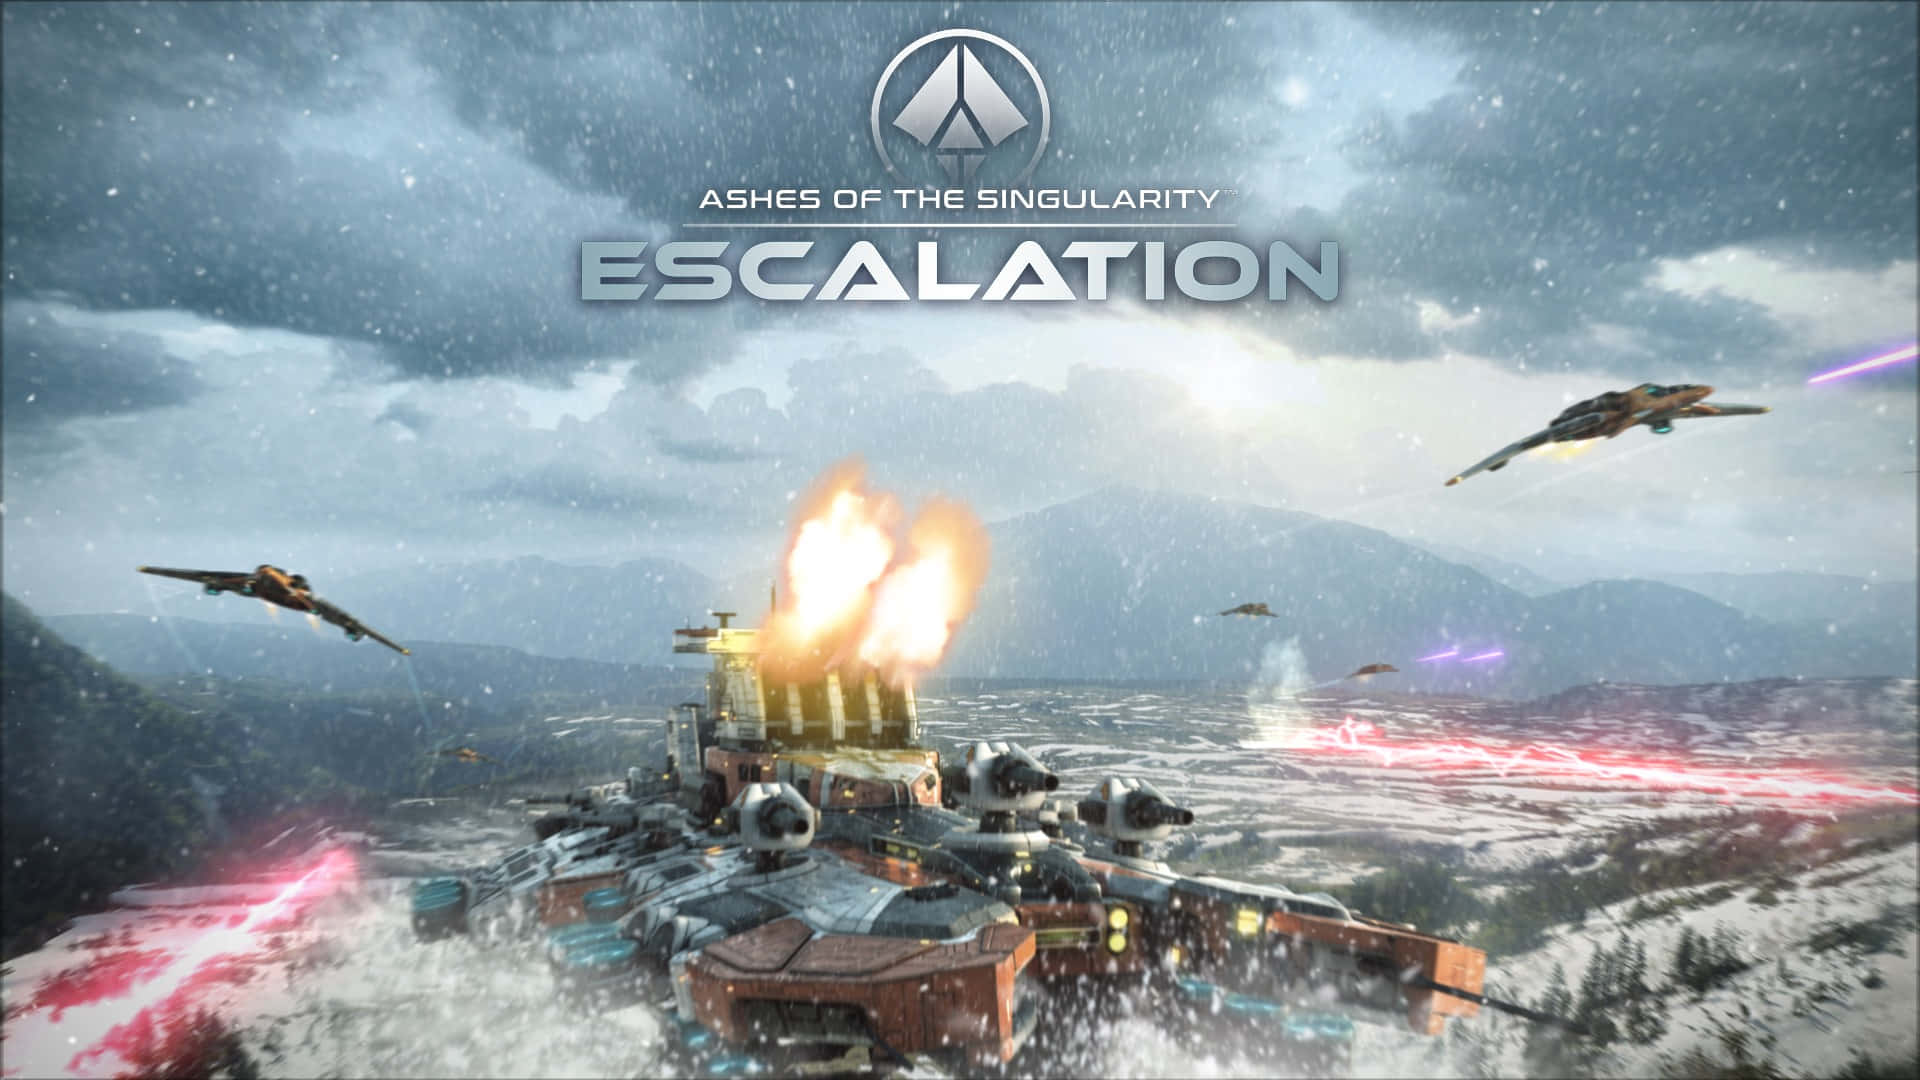 The Cover Of Escalation, With A Group Of Soldiers And A Plane